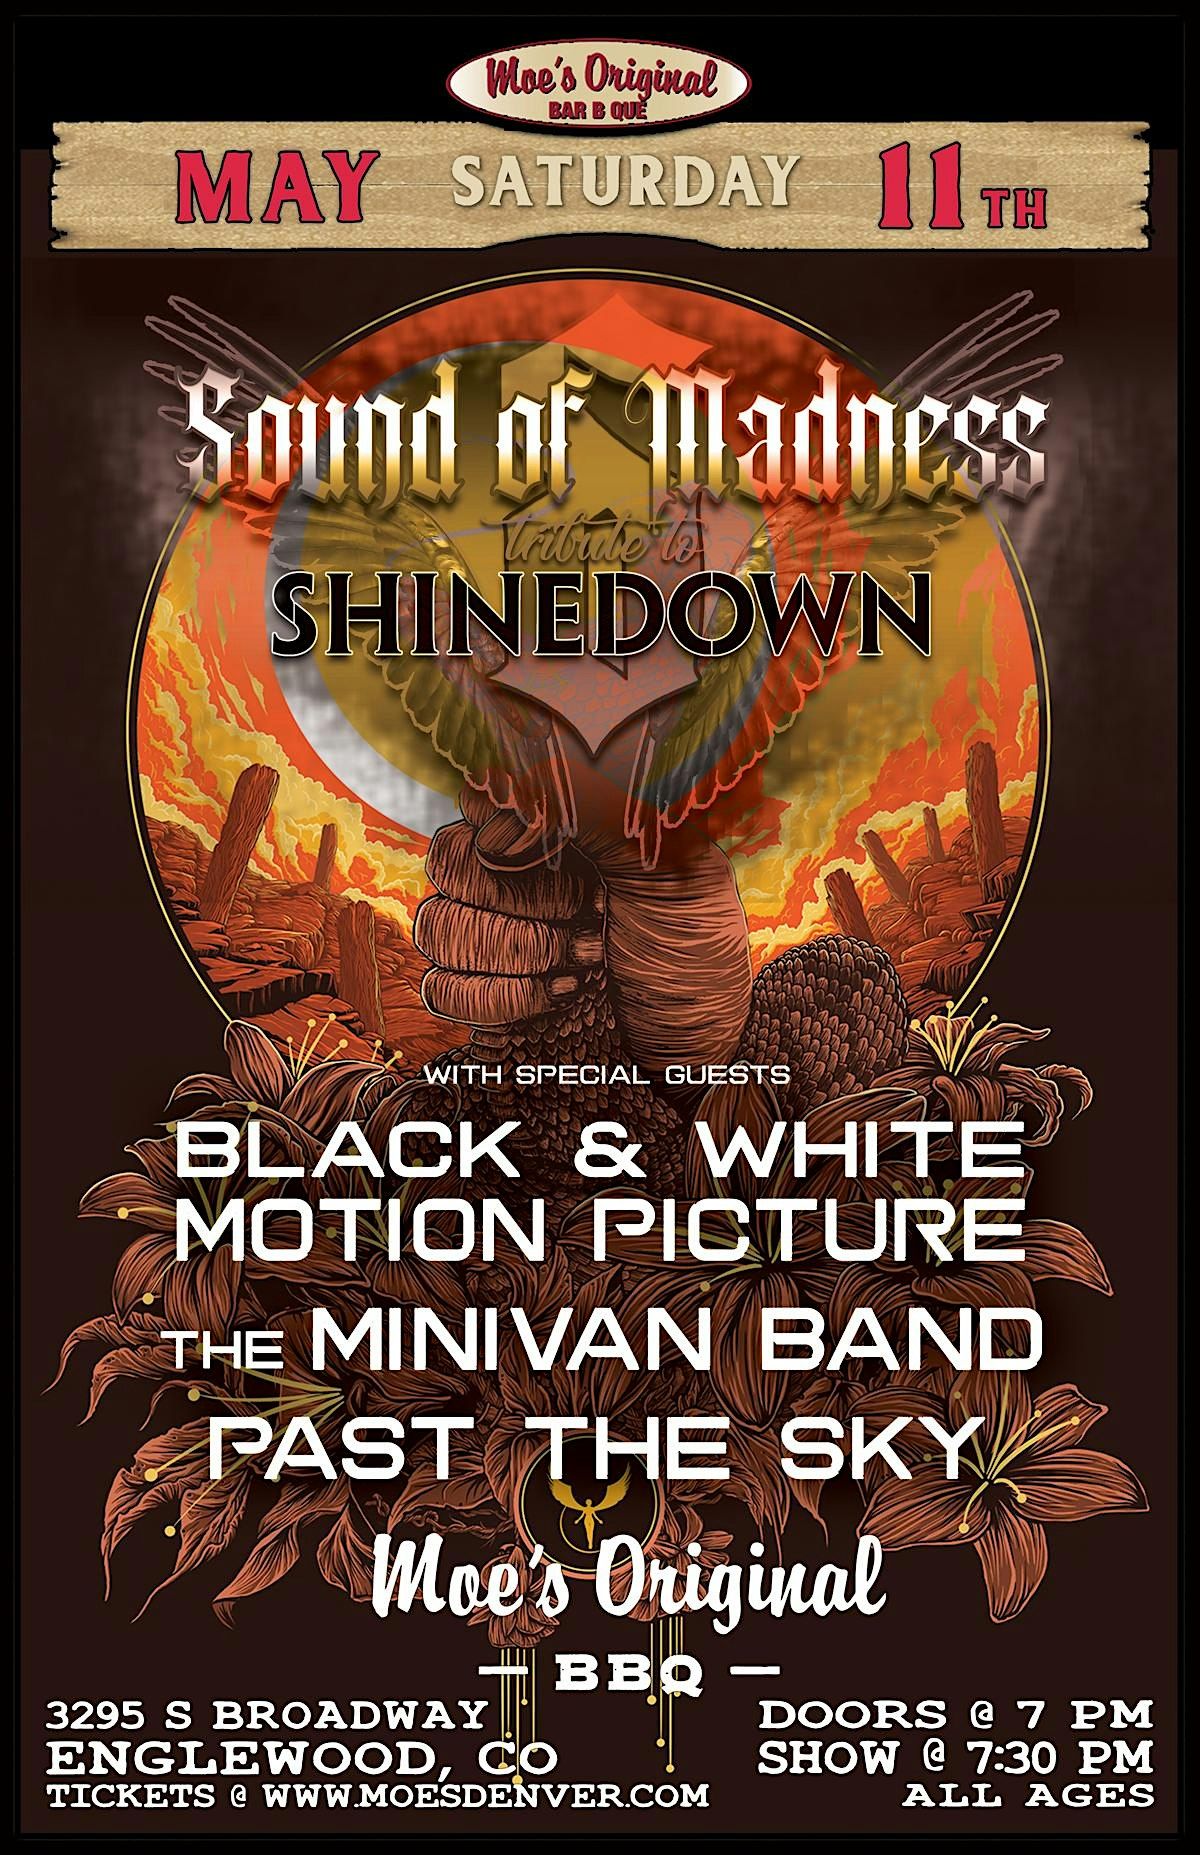 Sound of Madness w\/Black & White Motion Picture + Minivan Band+Past The Sky